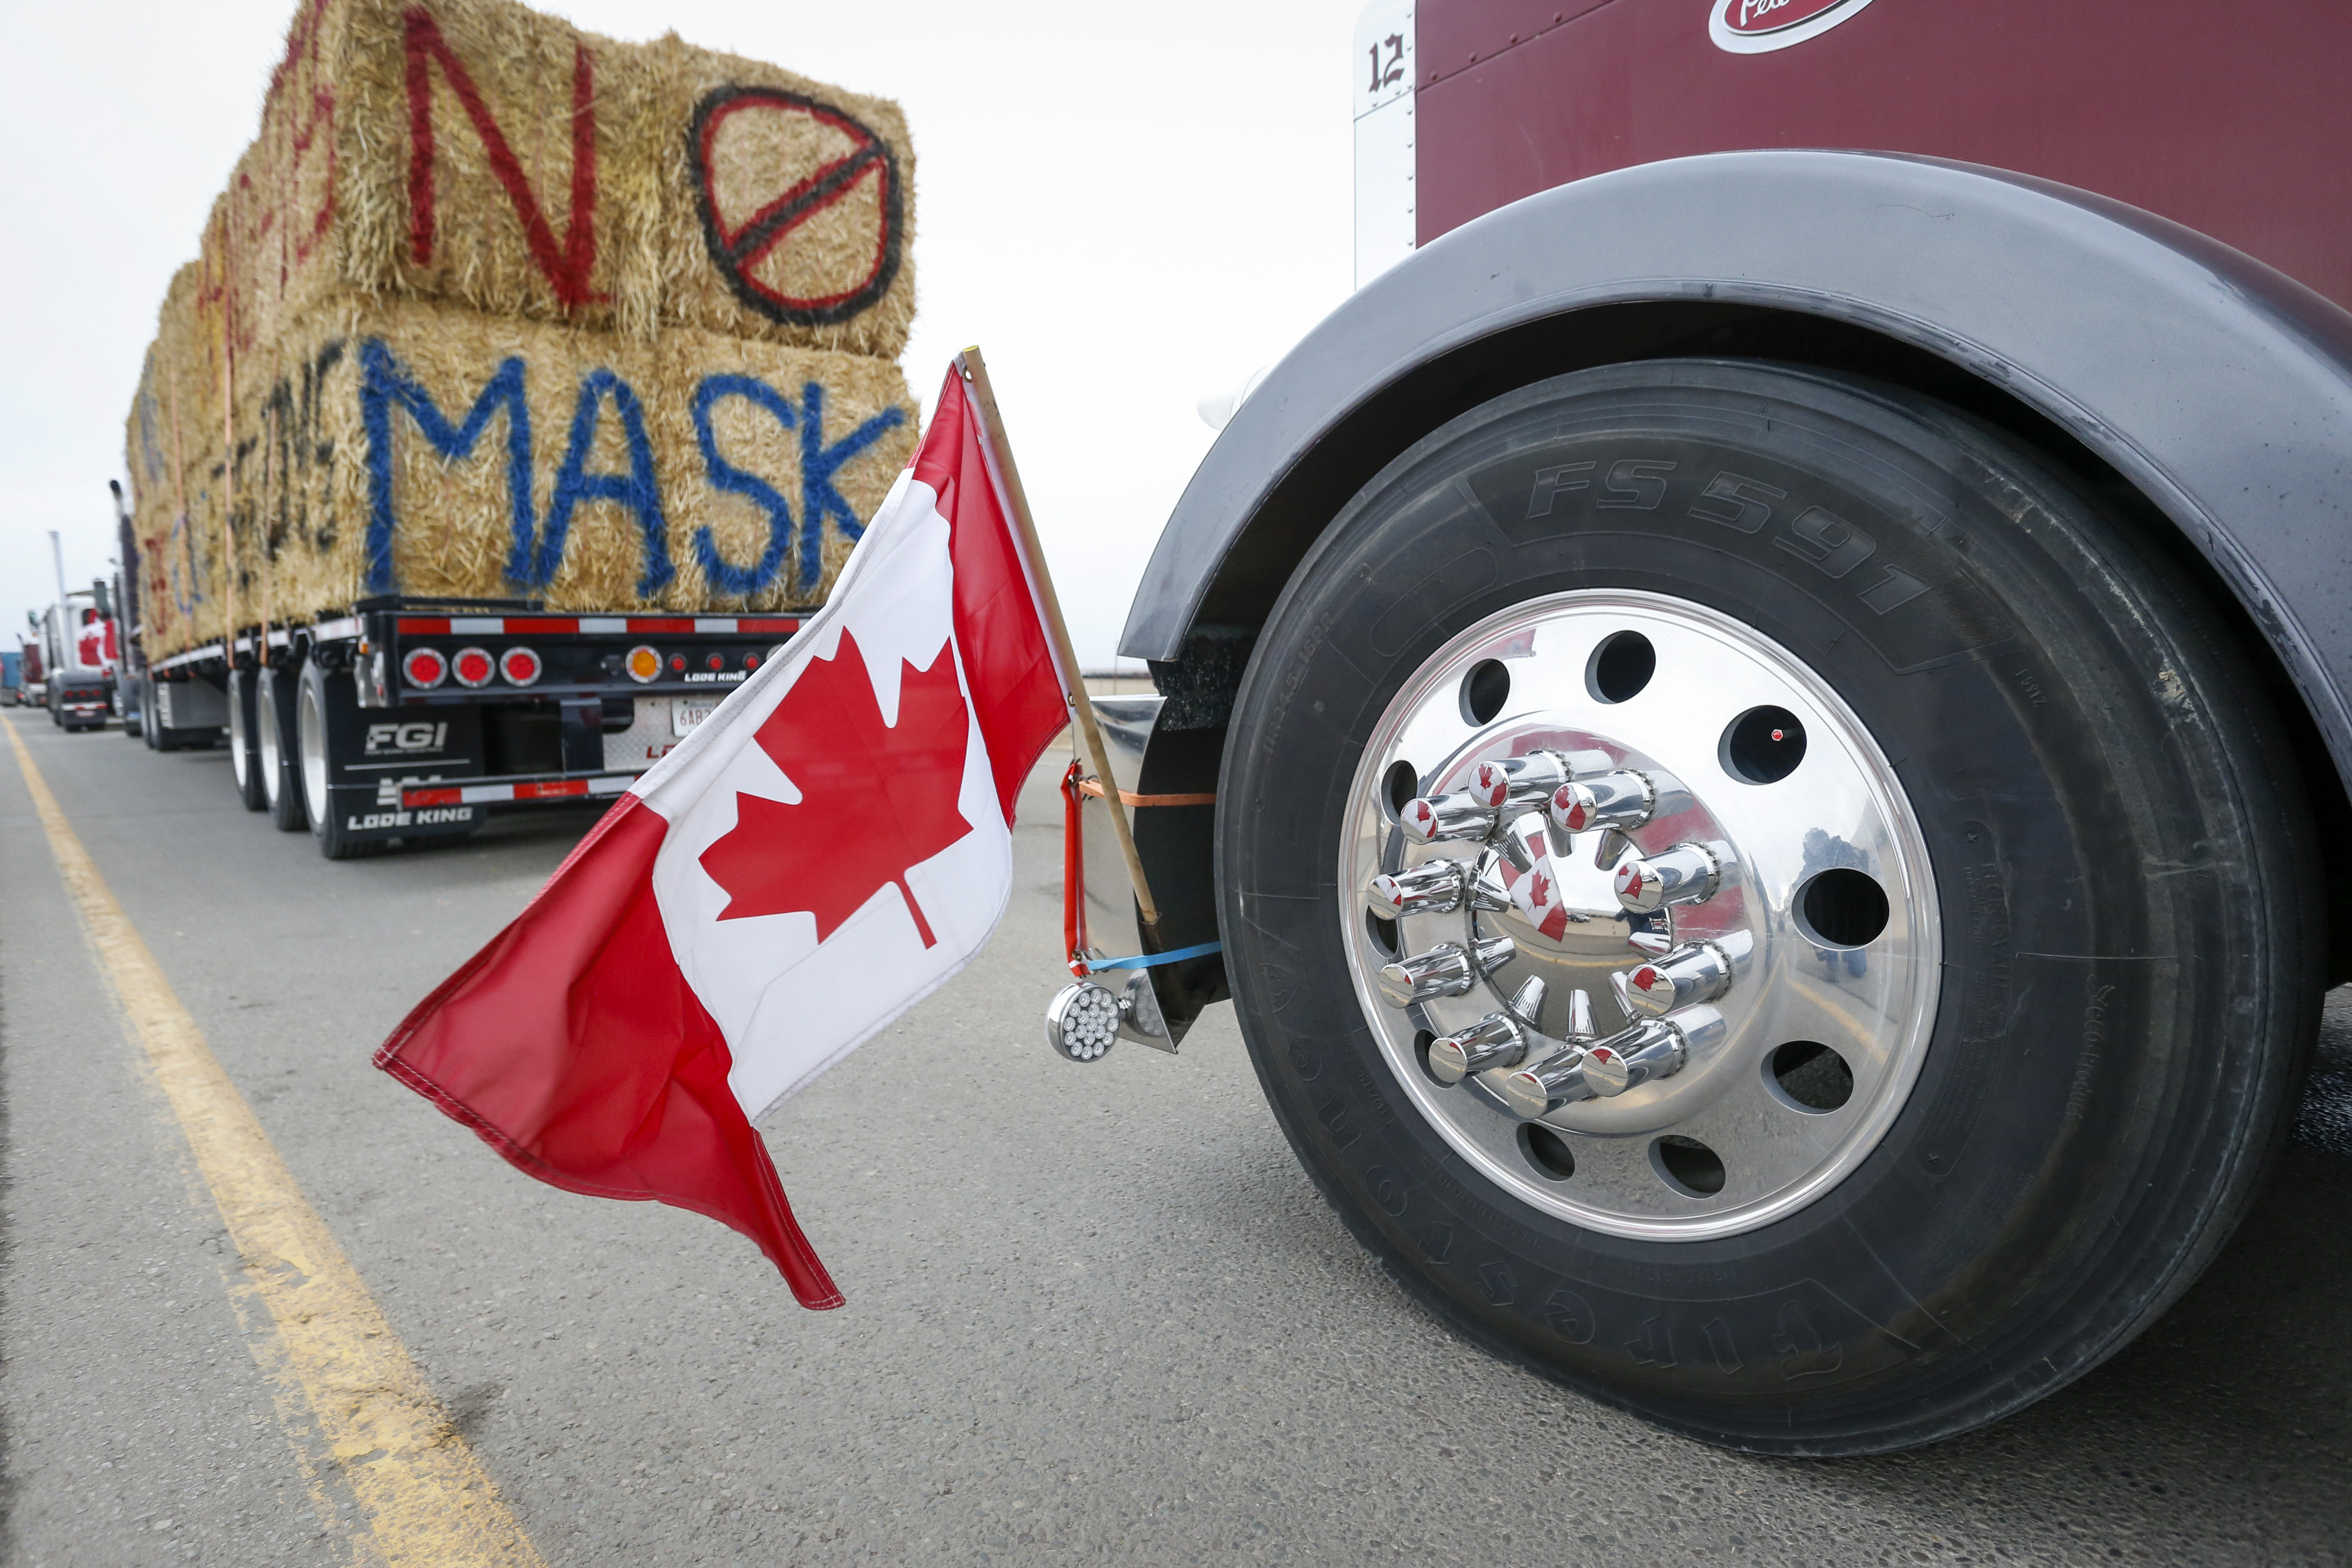  anti-mandate demonstrators gather as a truck convoy blocks the highway the busy U.S. border crossing in Coutts, Alta., Monday, Jan. 31, 2022.THE CANADIAN PRESS/Jeff McIntosh.JPG